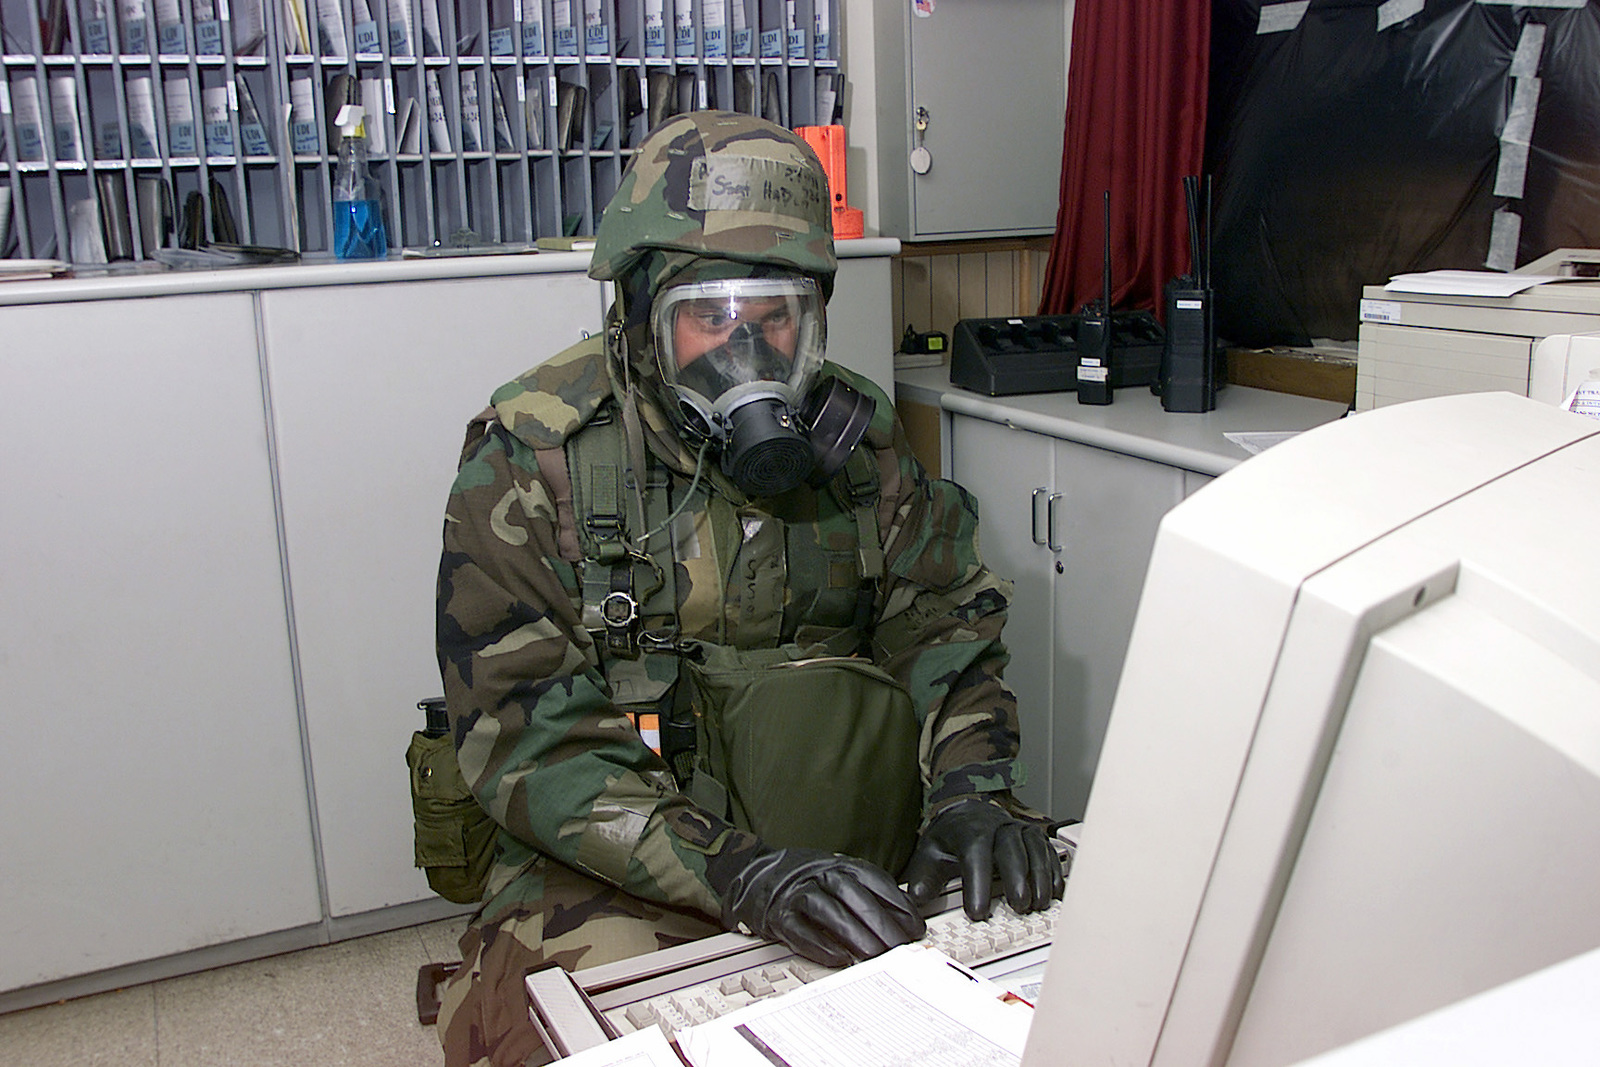 working-in-mission-oriented-protective-posture-response-level-4-mopp-4-staff-edb6a8-1600.jpg